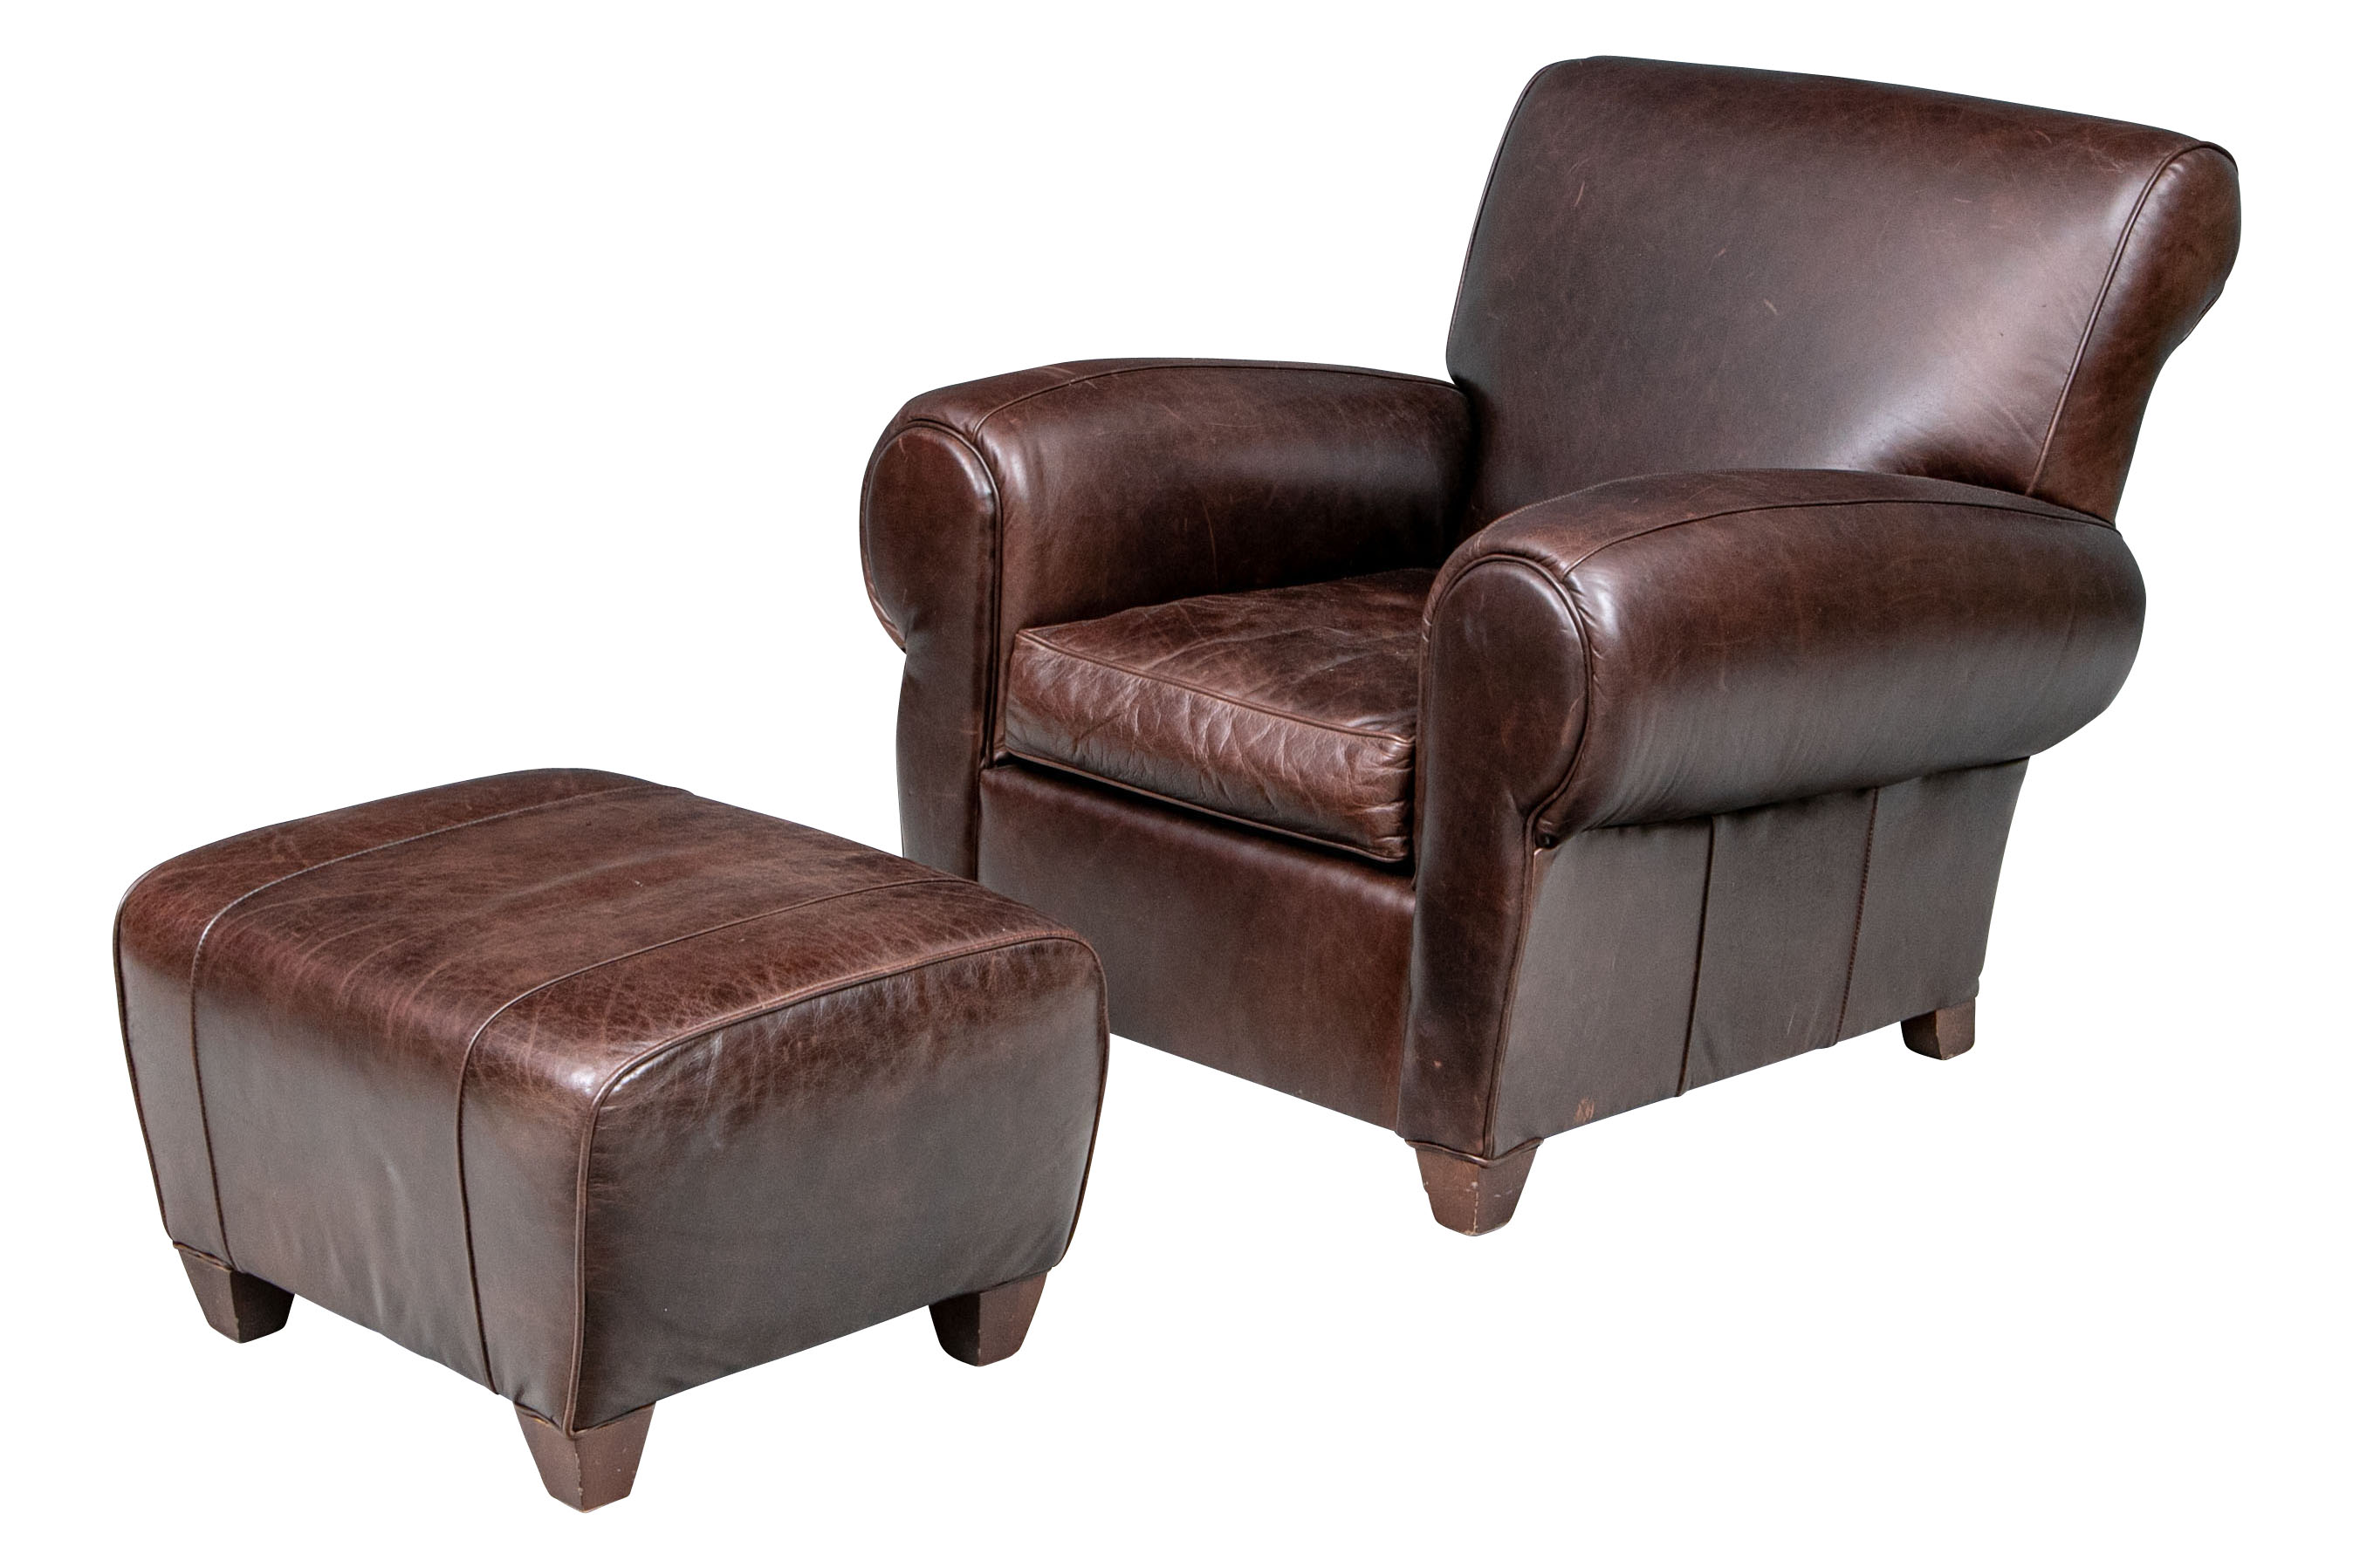 Mitc Gold Leather Club Chair And, Leather Club Chair Ottoman